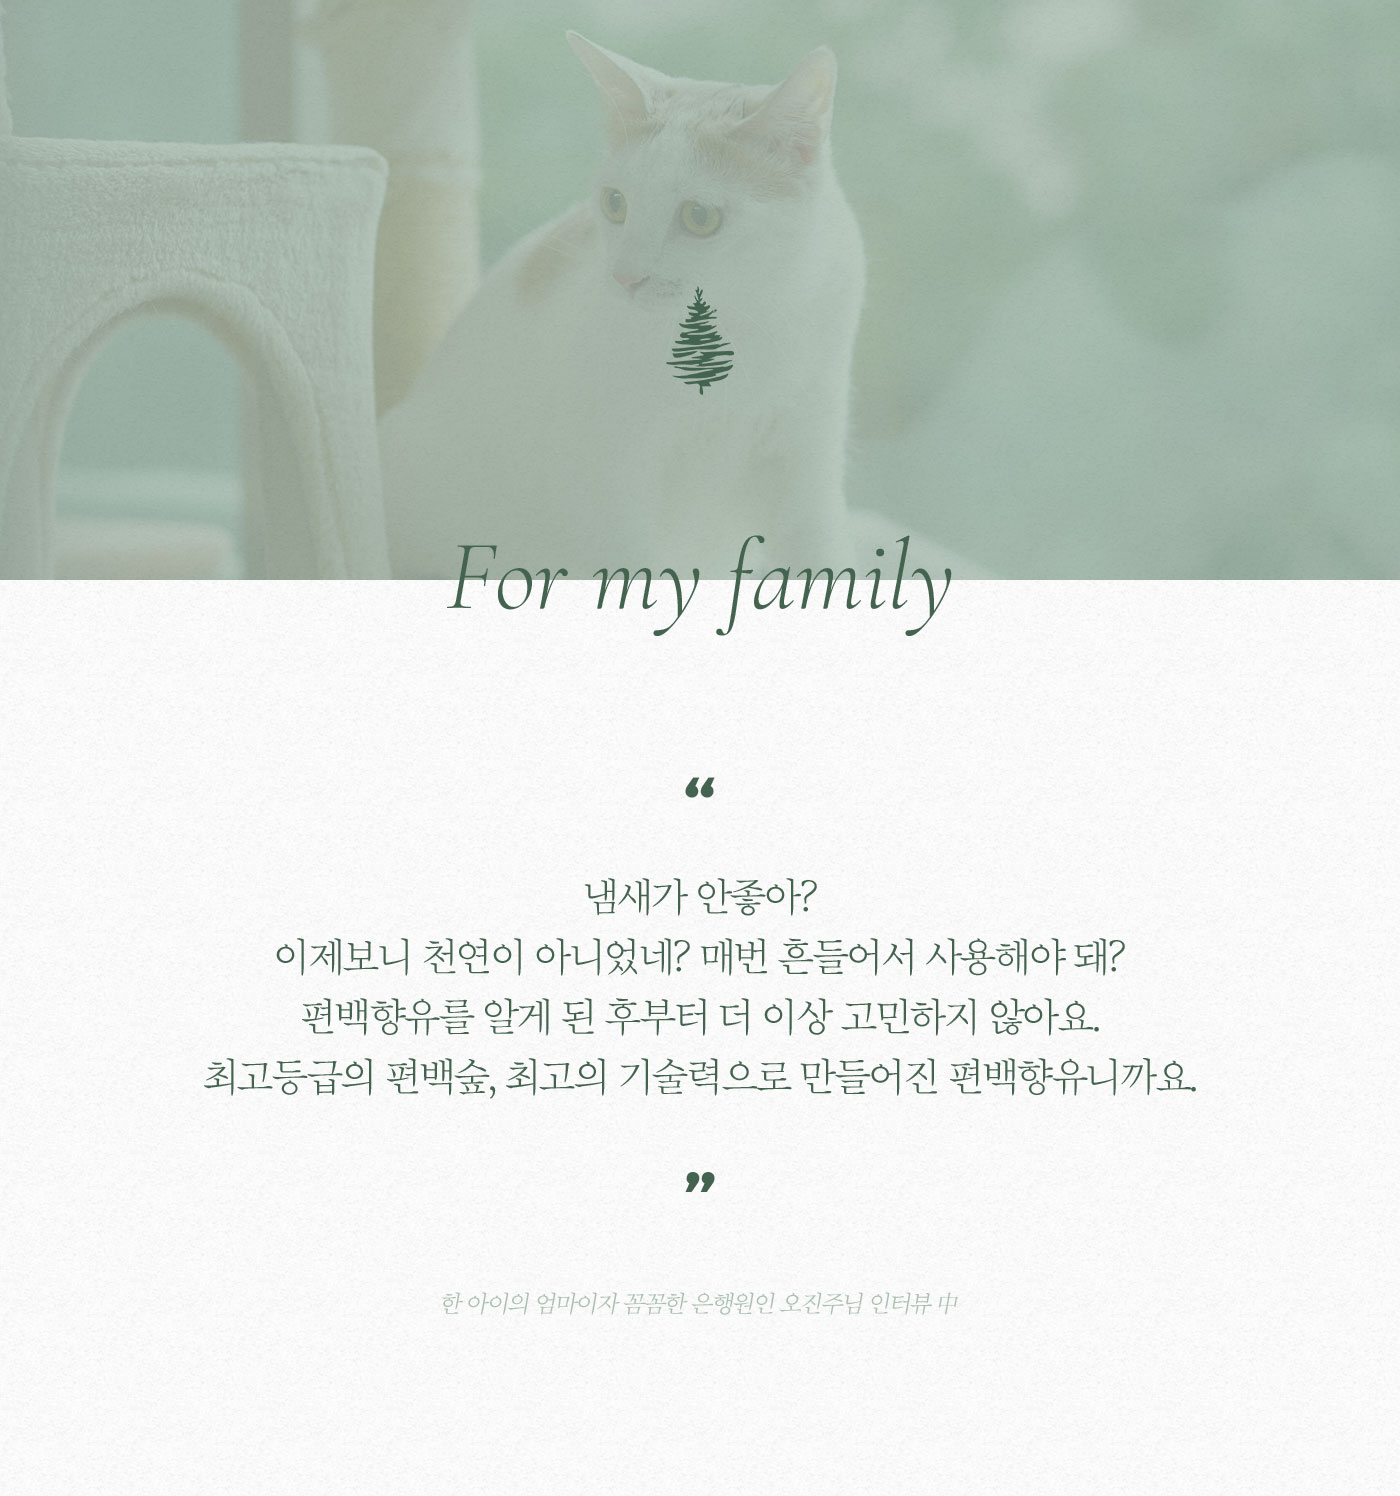 For my family